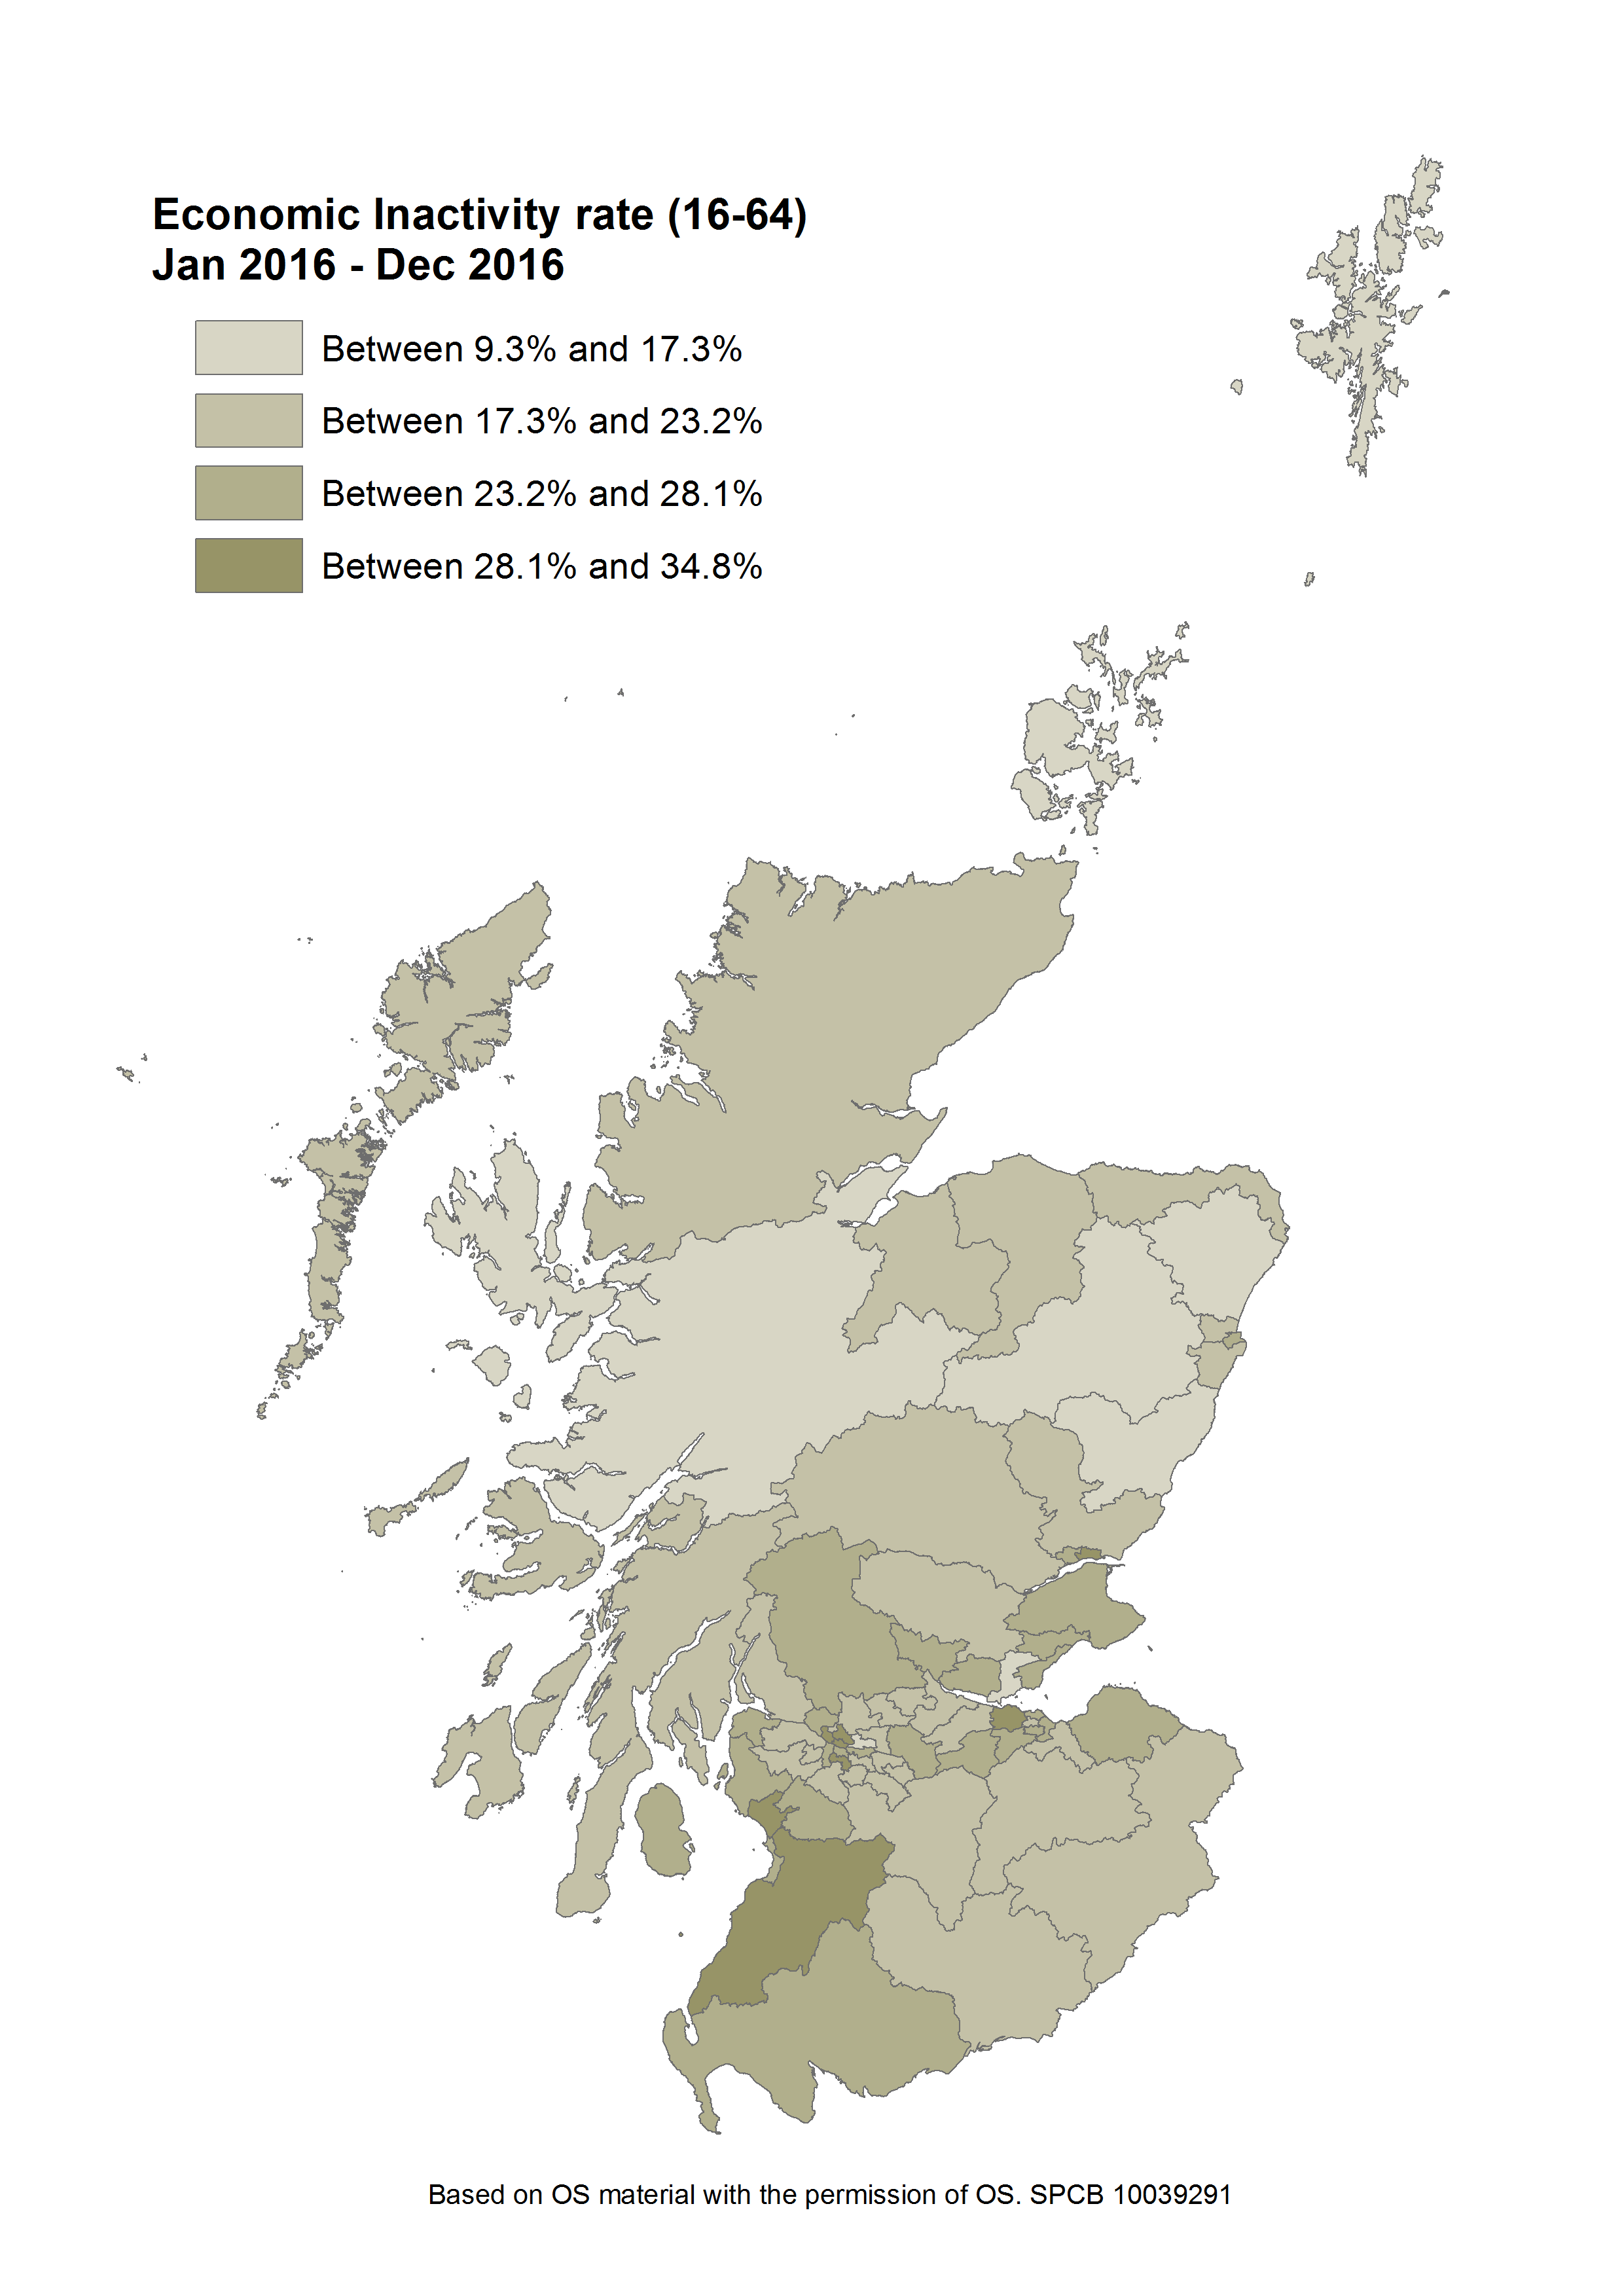 Economic Inactivity rates for each Scottish parliament constituency. 